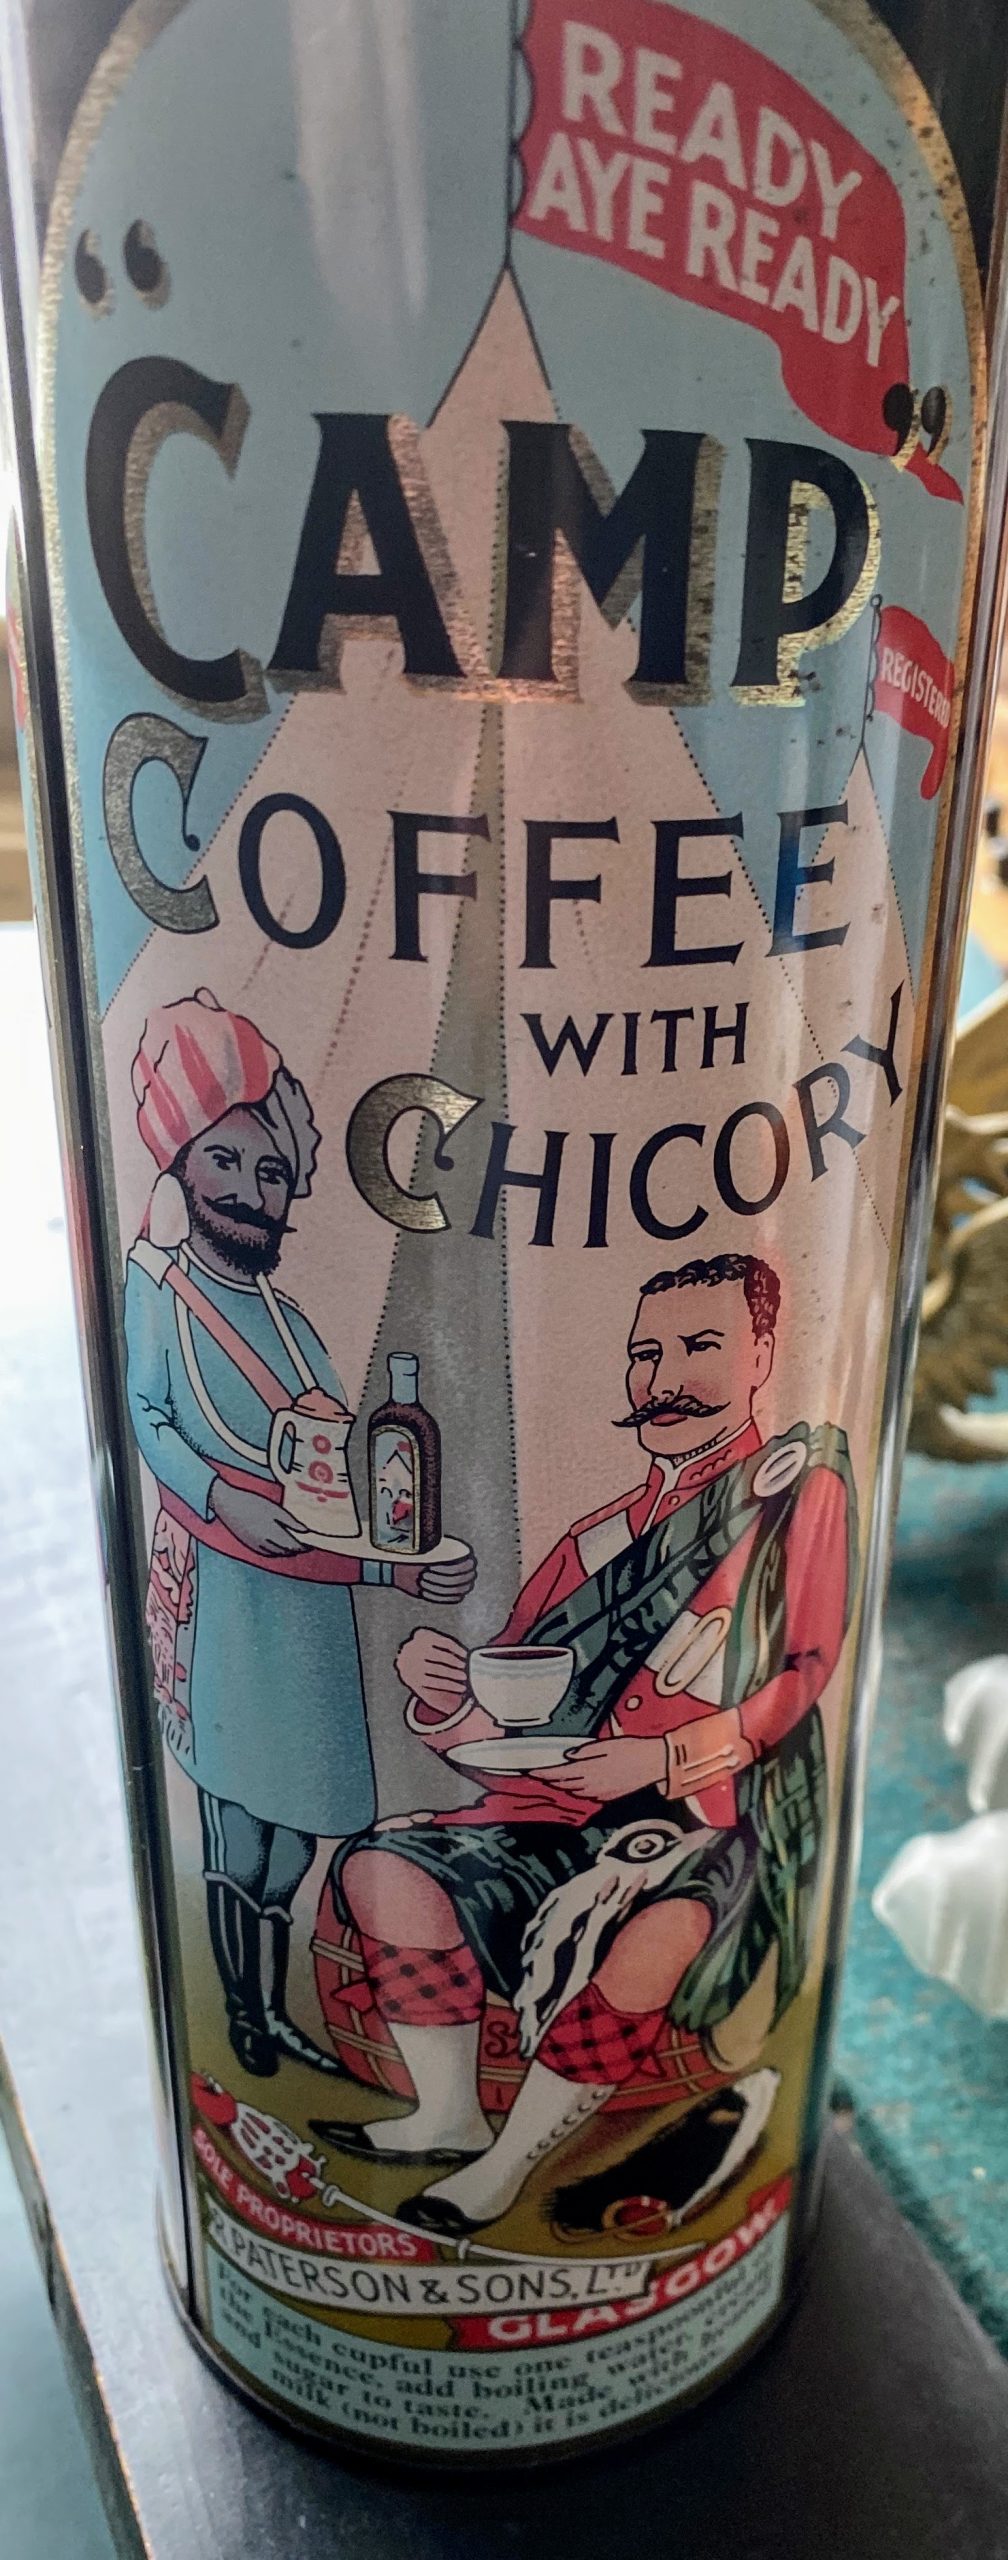 https://www.pertuttigusti.be/wp-content/uploads/2021/07/Controversieel-Vintage-Camp-Coffee-with-Chicory-blik-R-Paterson-and-Sons-Ltd-Glasgow-3-scaled.jpg